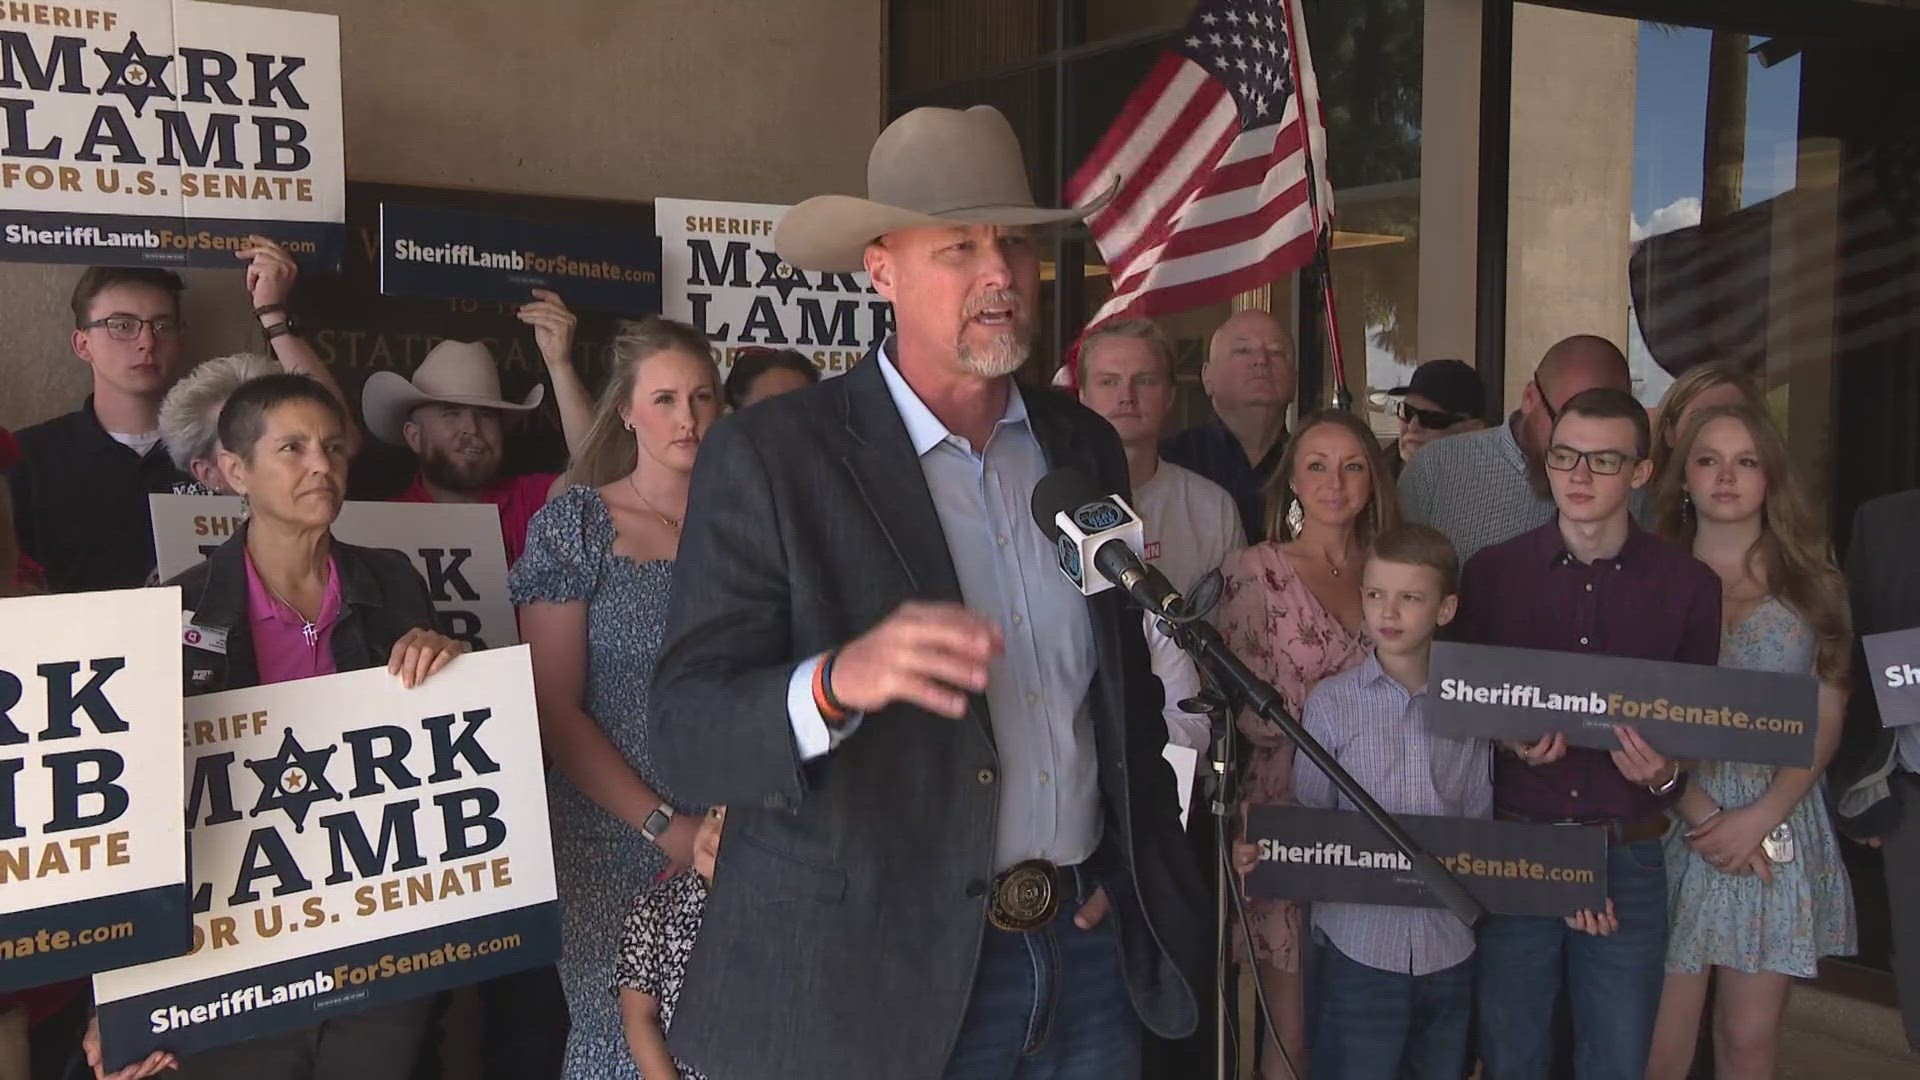 Lamb says his campaign was able to get more then 13,000 signatures.